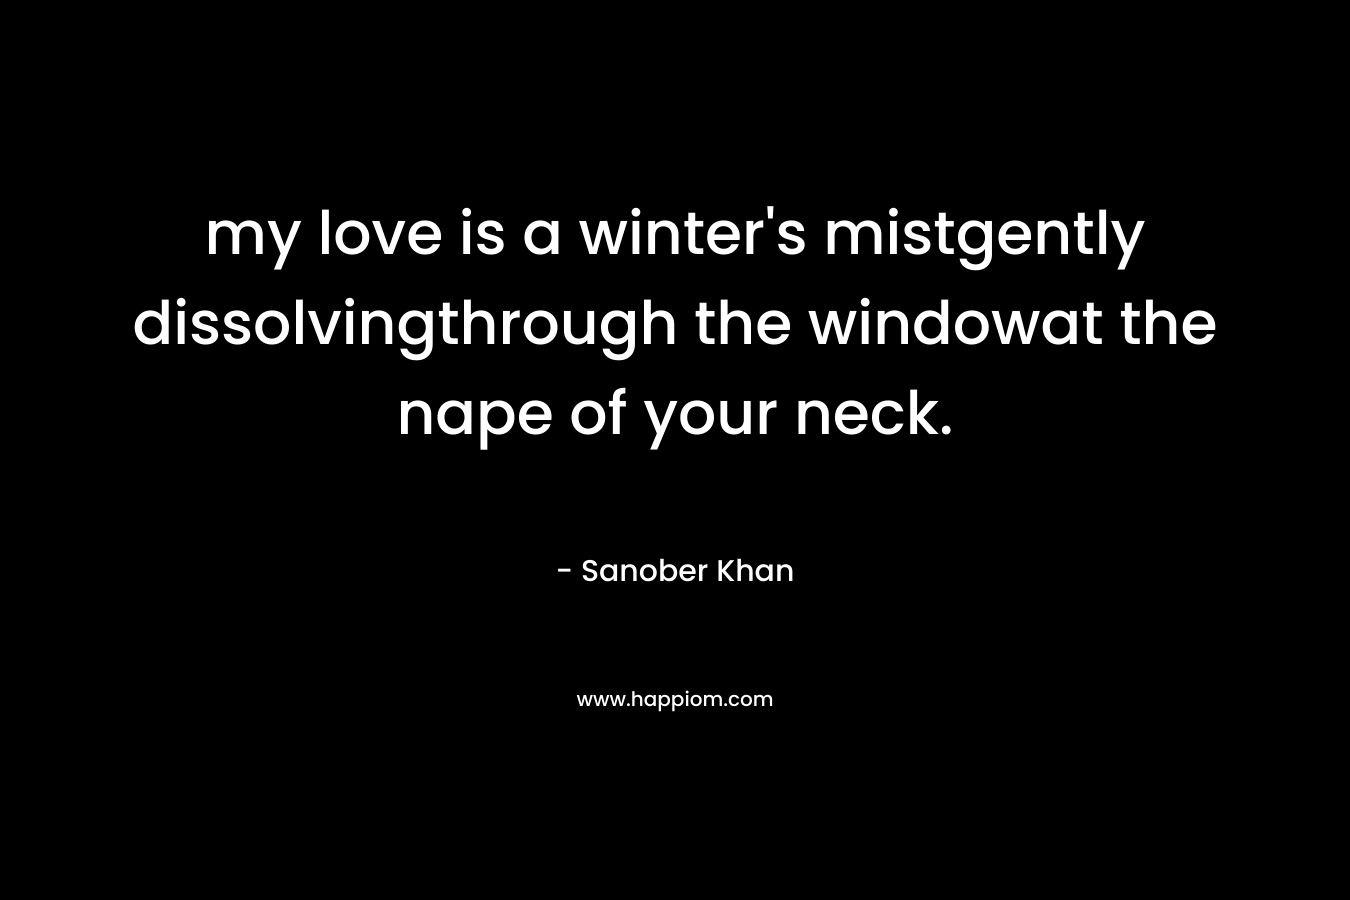 my love is a winter's mistgently dissolvingthrough the windowat the nape of your neck.